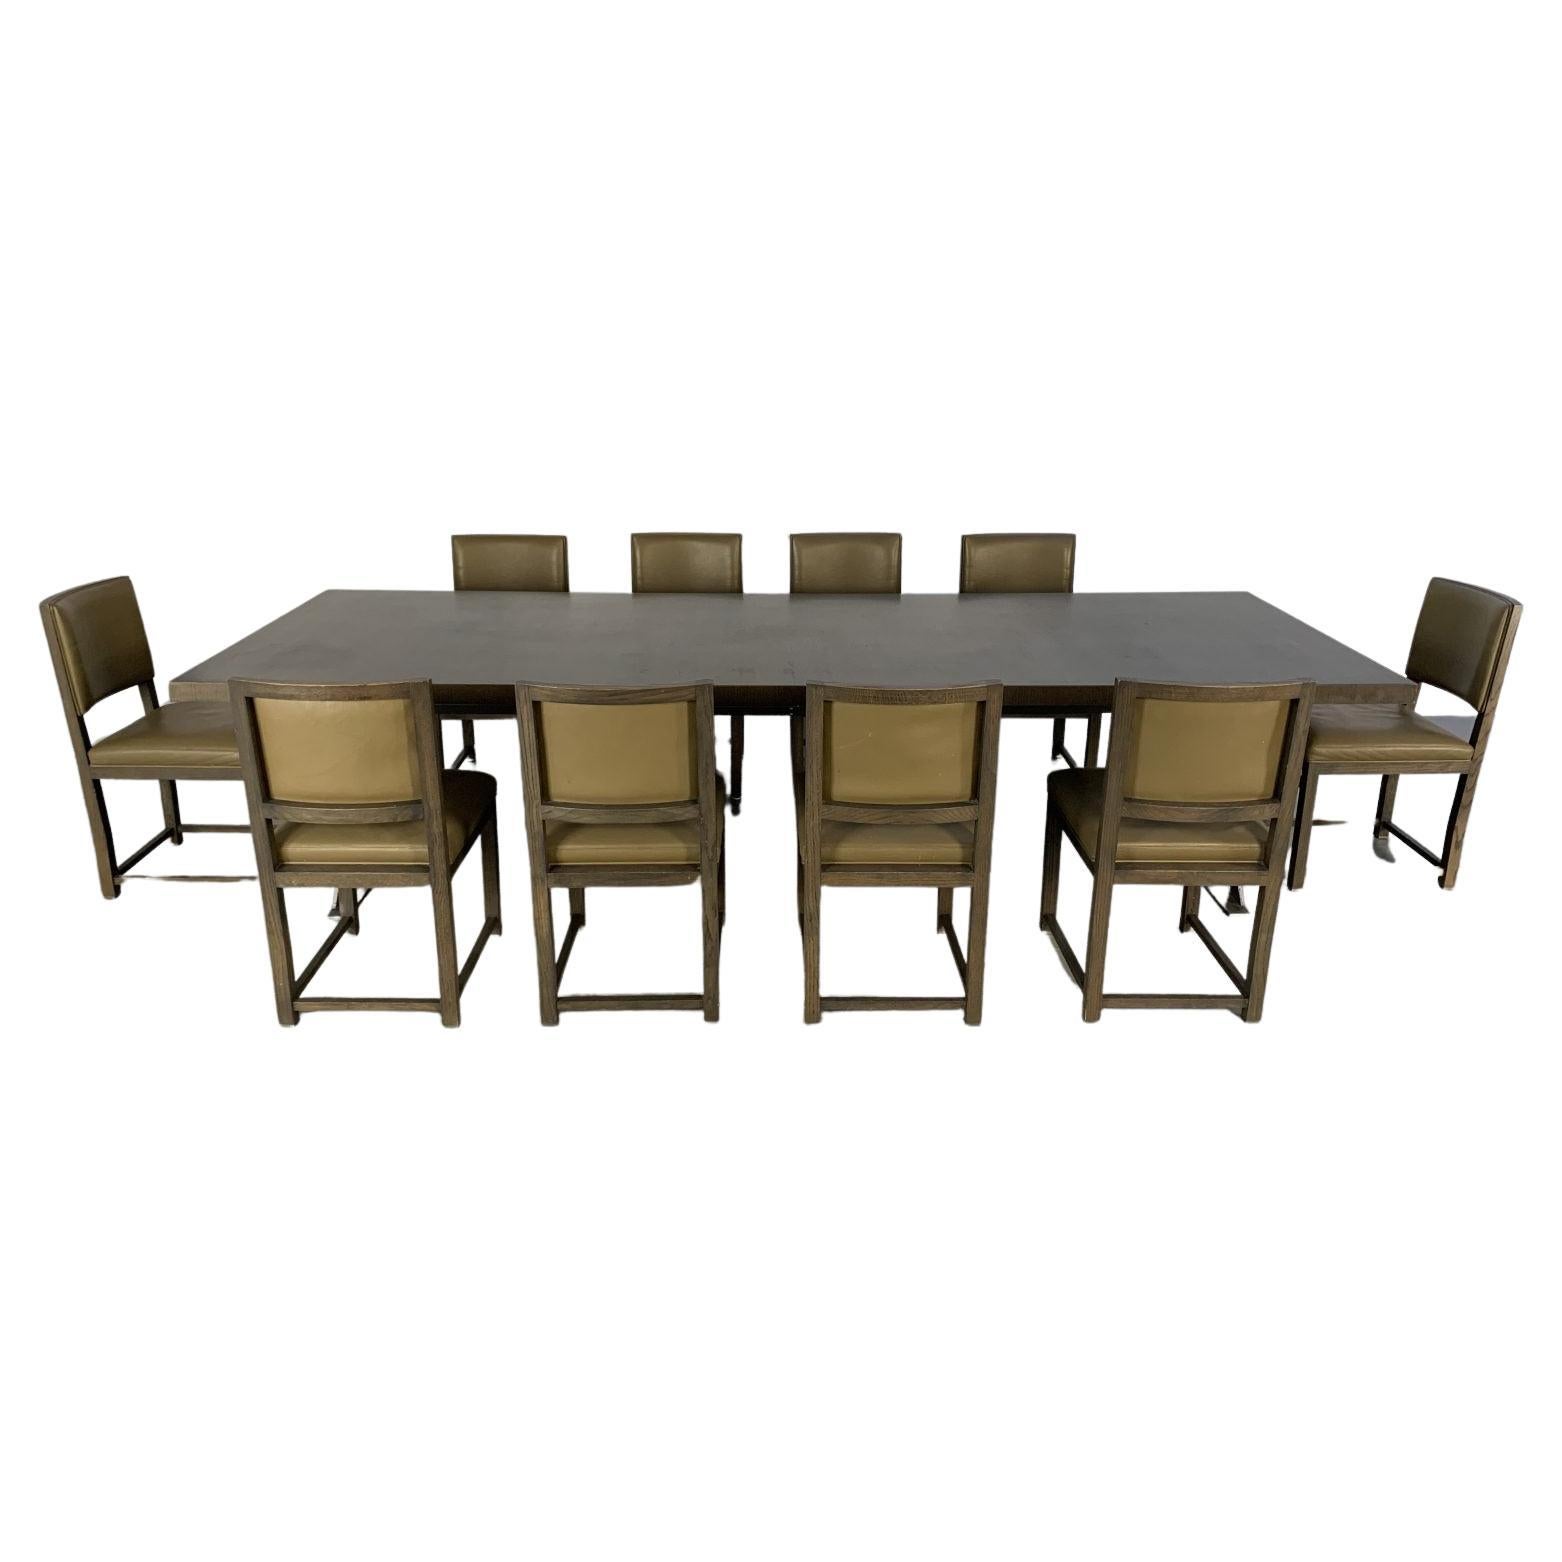 Sublime Huge B&B Italia “Max” Dining Table & 10 “Maxalto” Dining Chairs in Grey